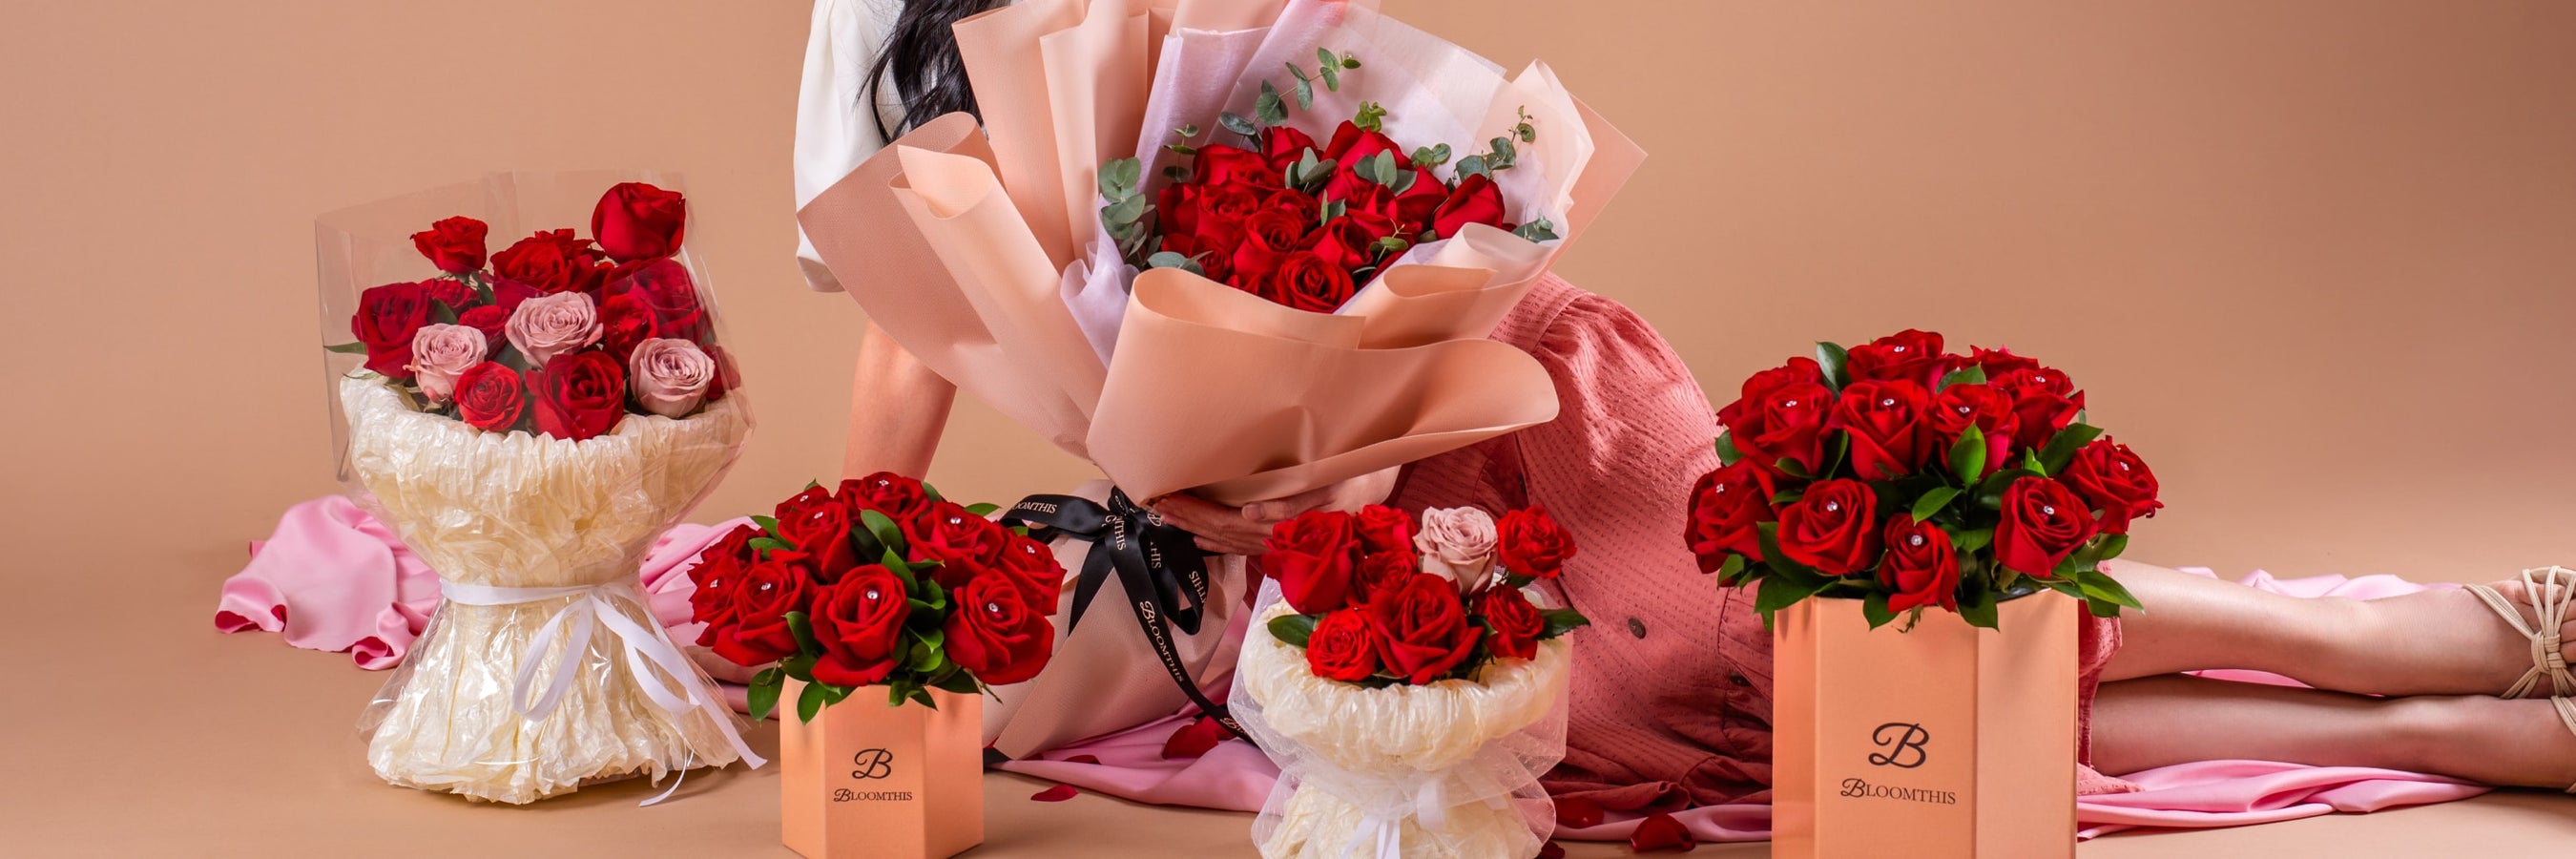 BloomThis Red Rose Flowers & Bouquets